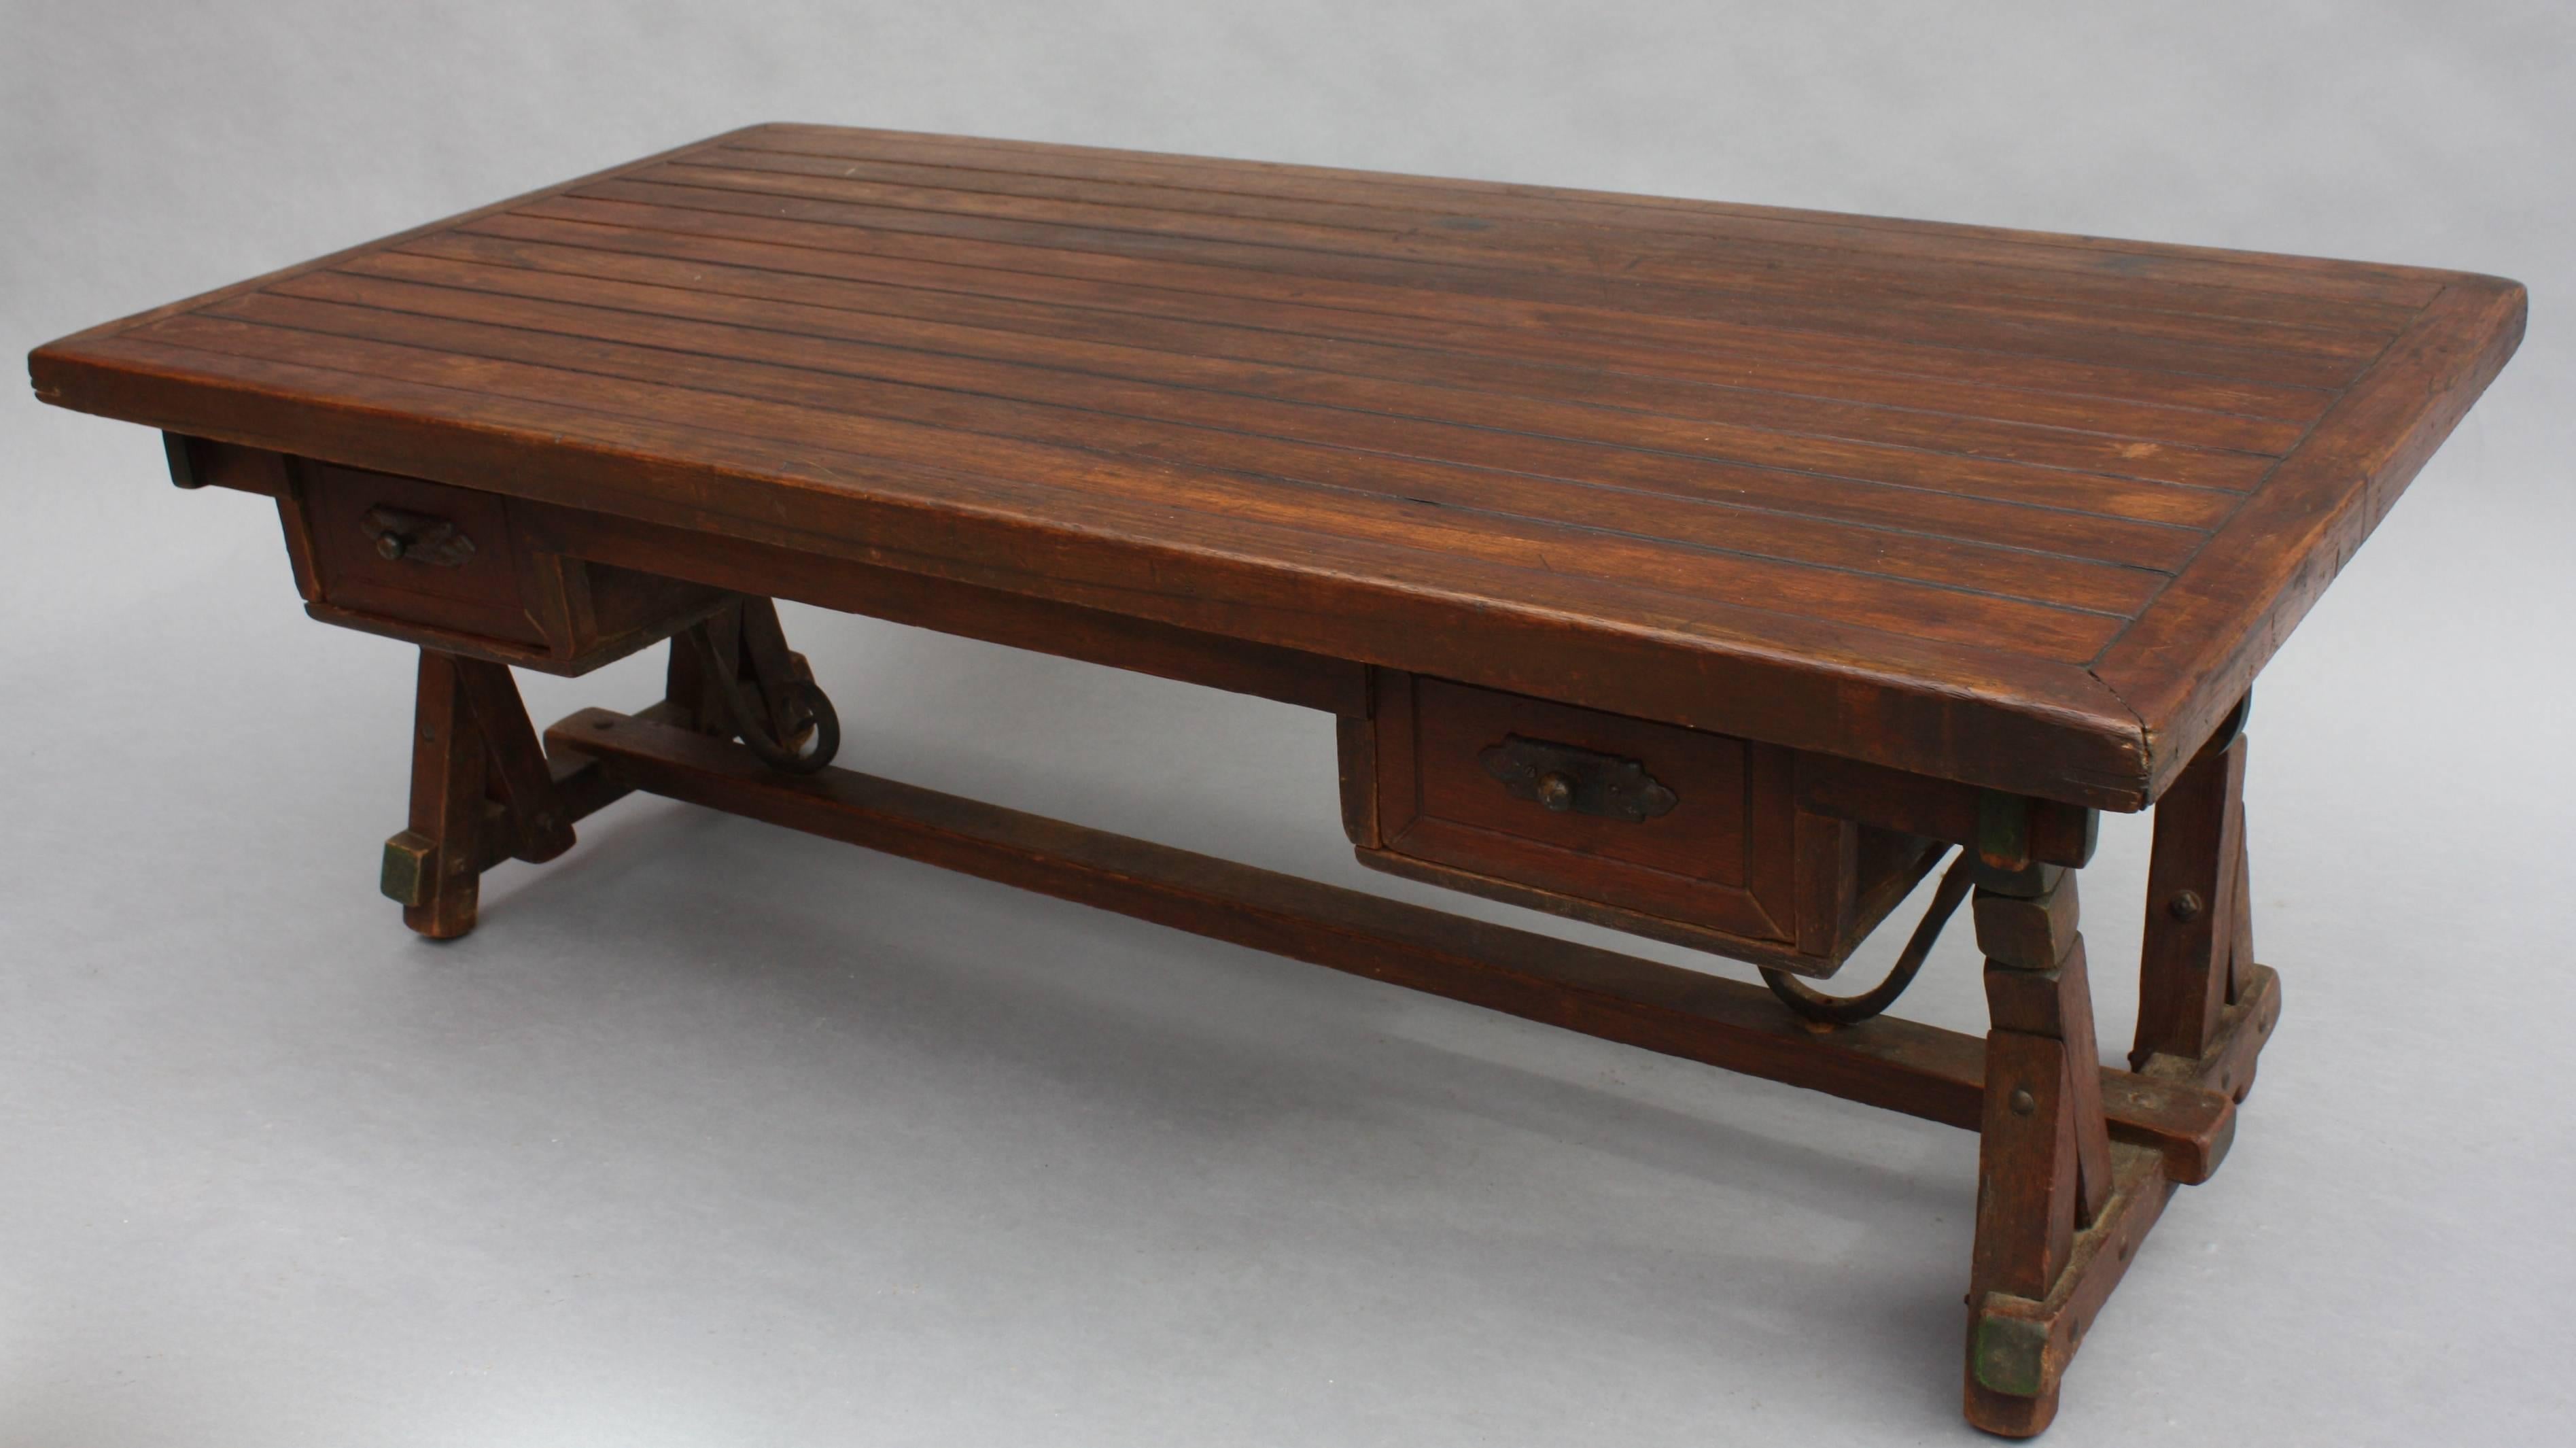 Wonderful Monterey period coffee table with original polychrome accents and two drawers for storage.